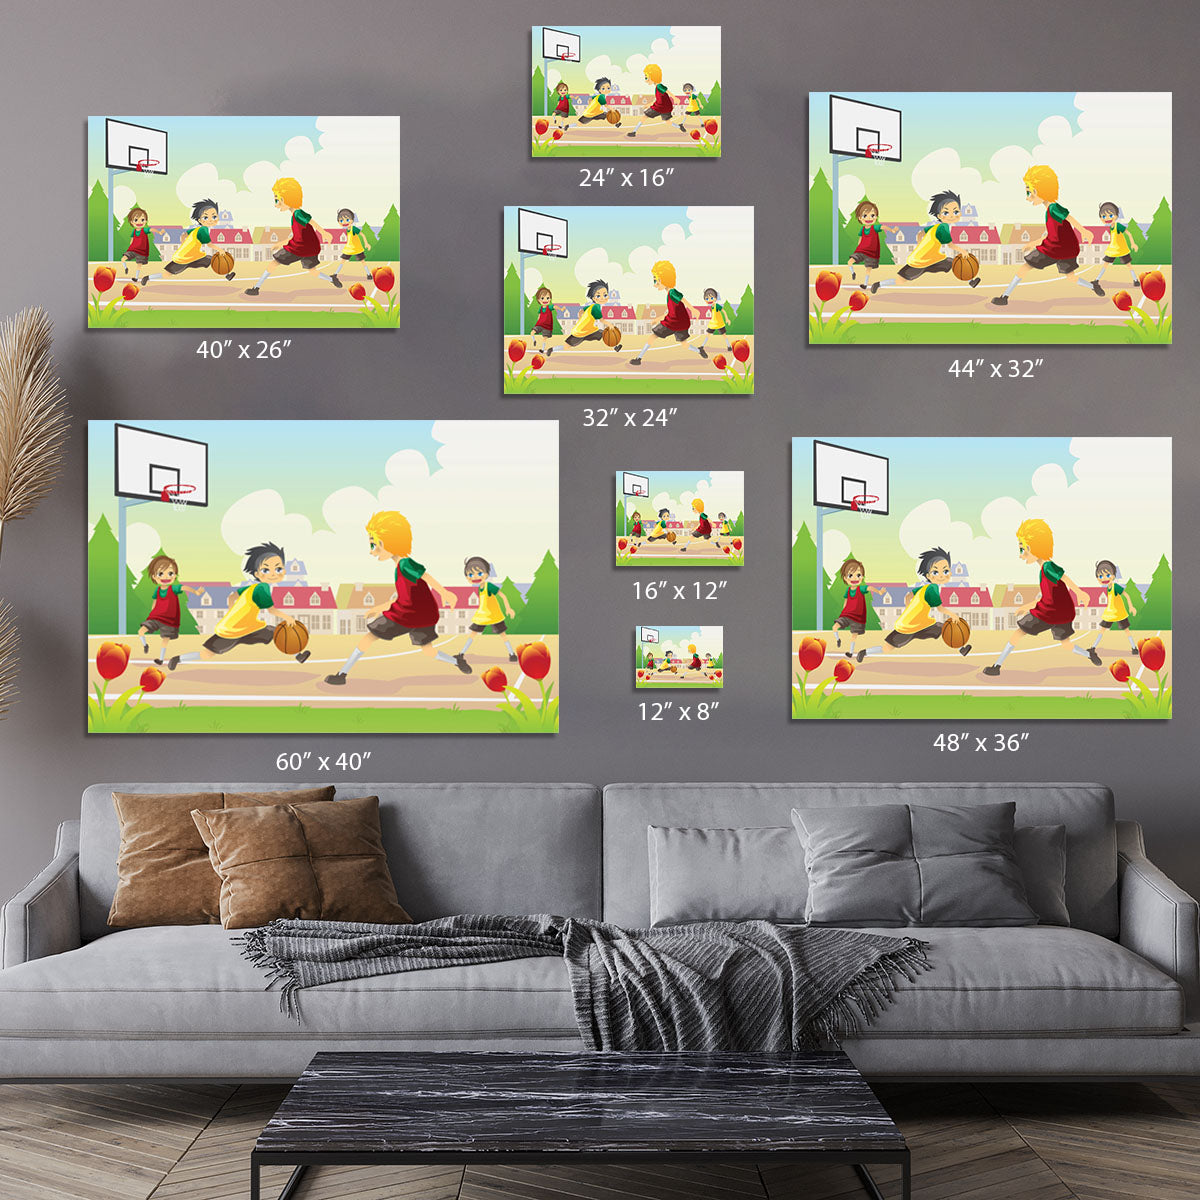 Kids playing basketball in the suburban area Canvas Print or Poster - Canvas Art Rocks - 7